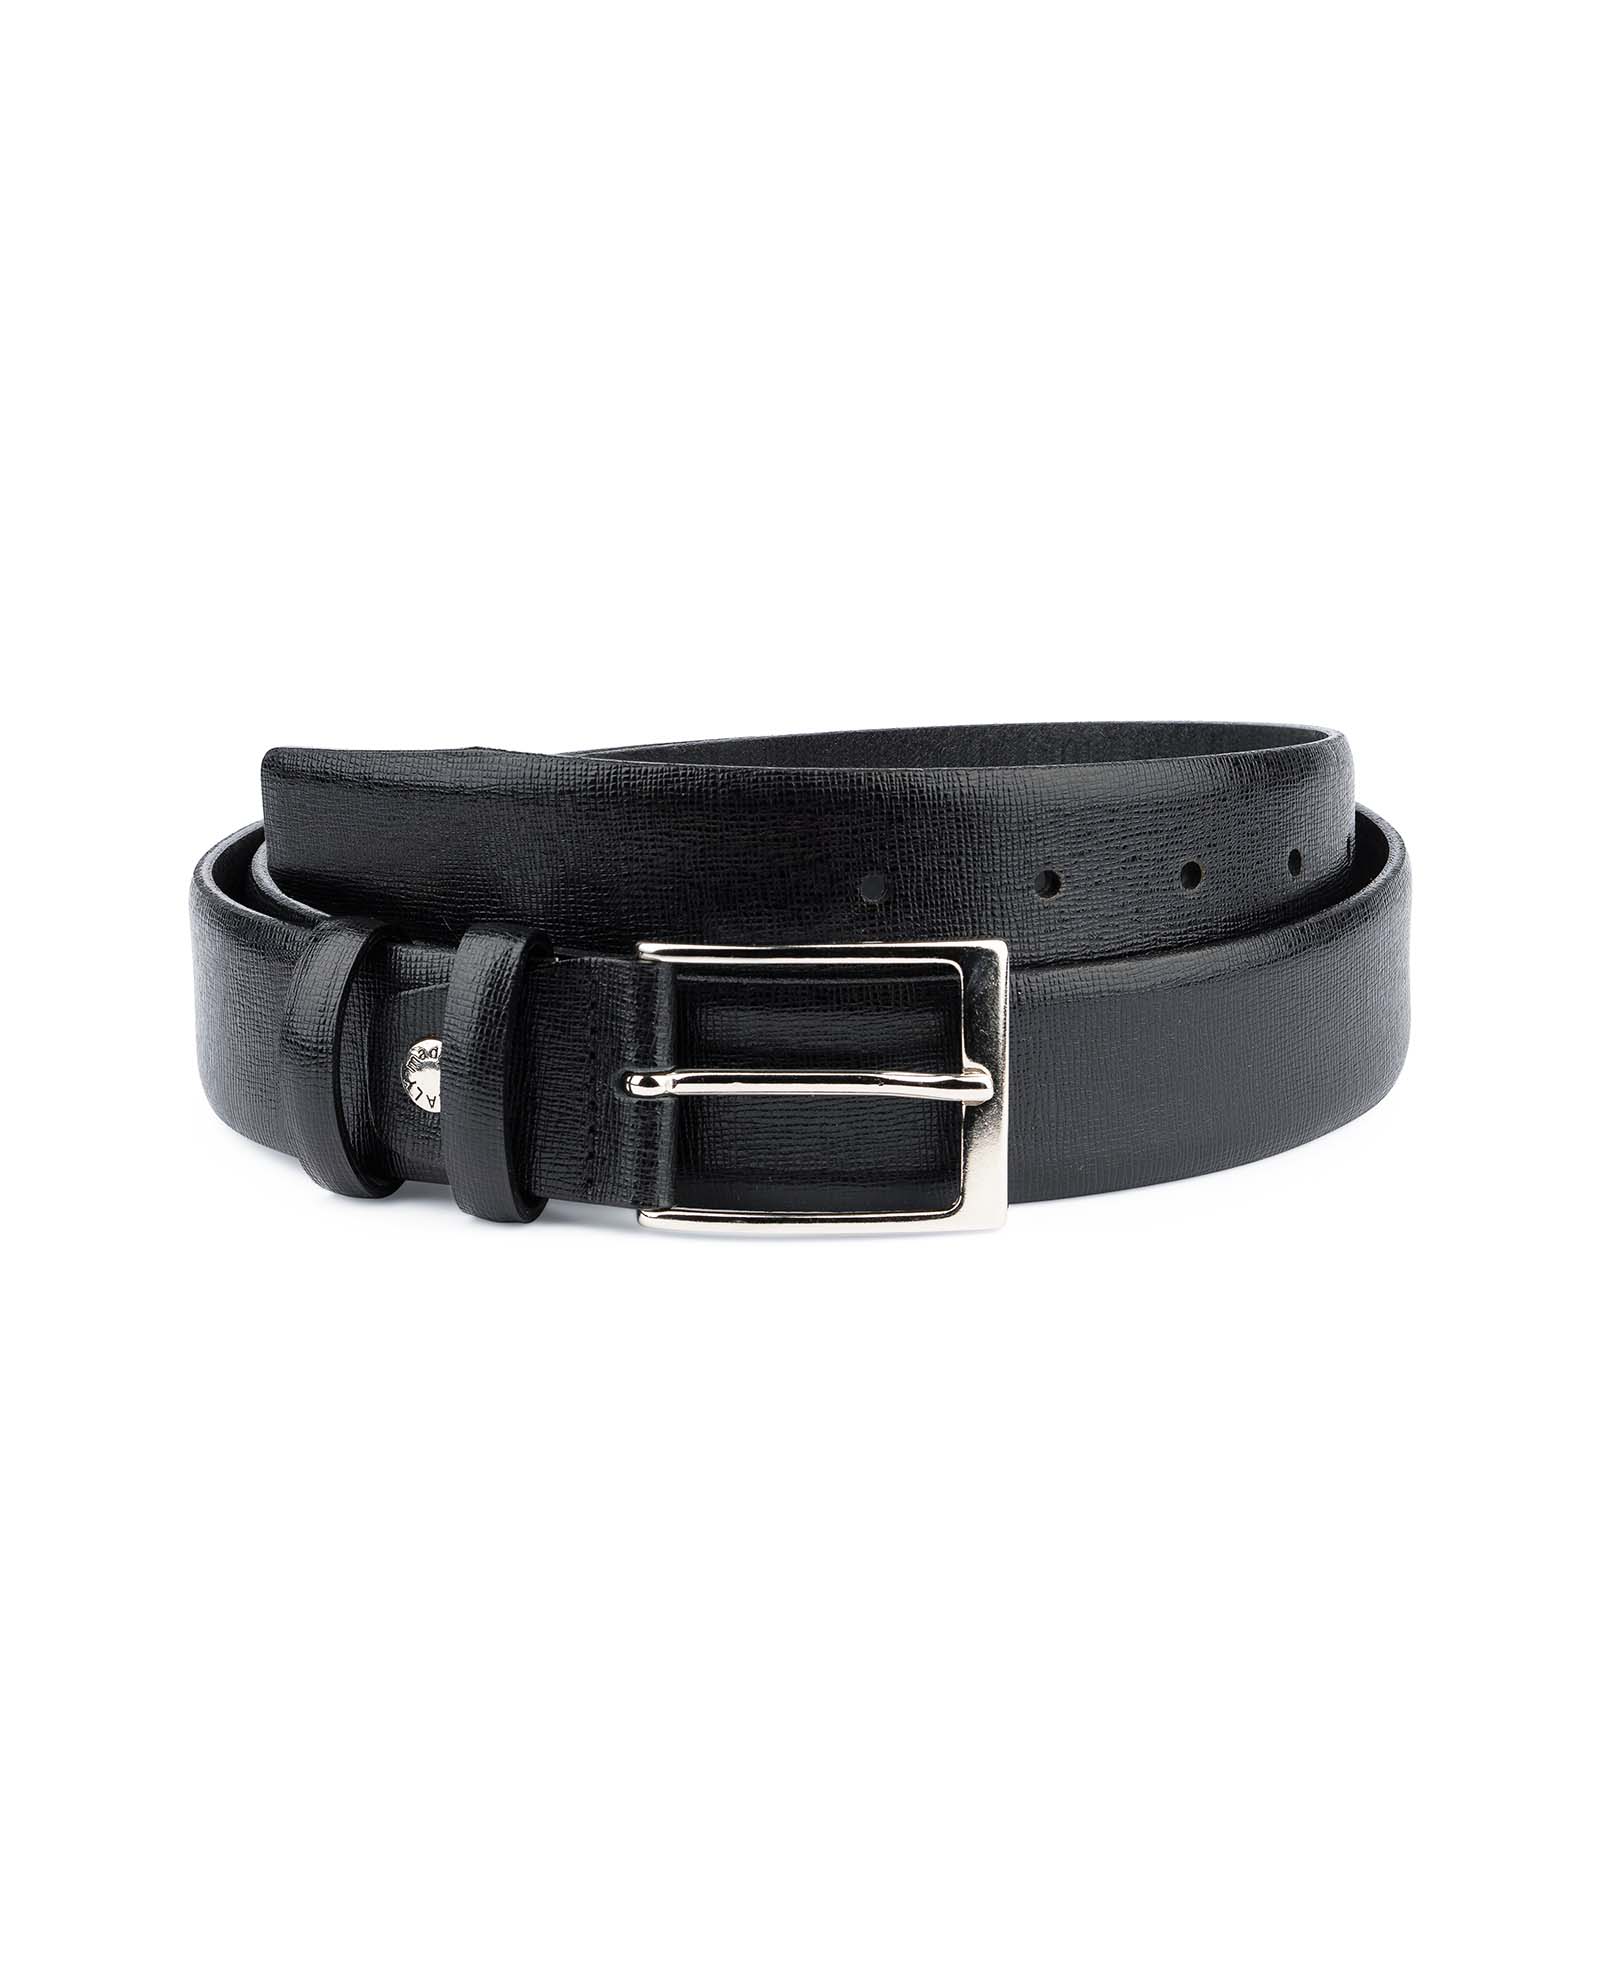 3 cm Saffiano Leather Belt in Black Men's belts Classic dress Made in Italy